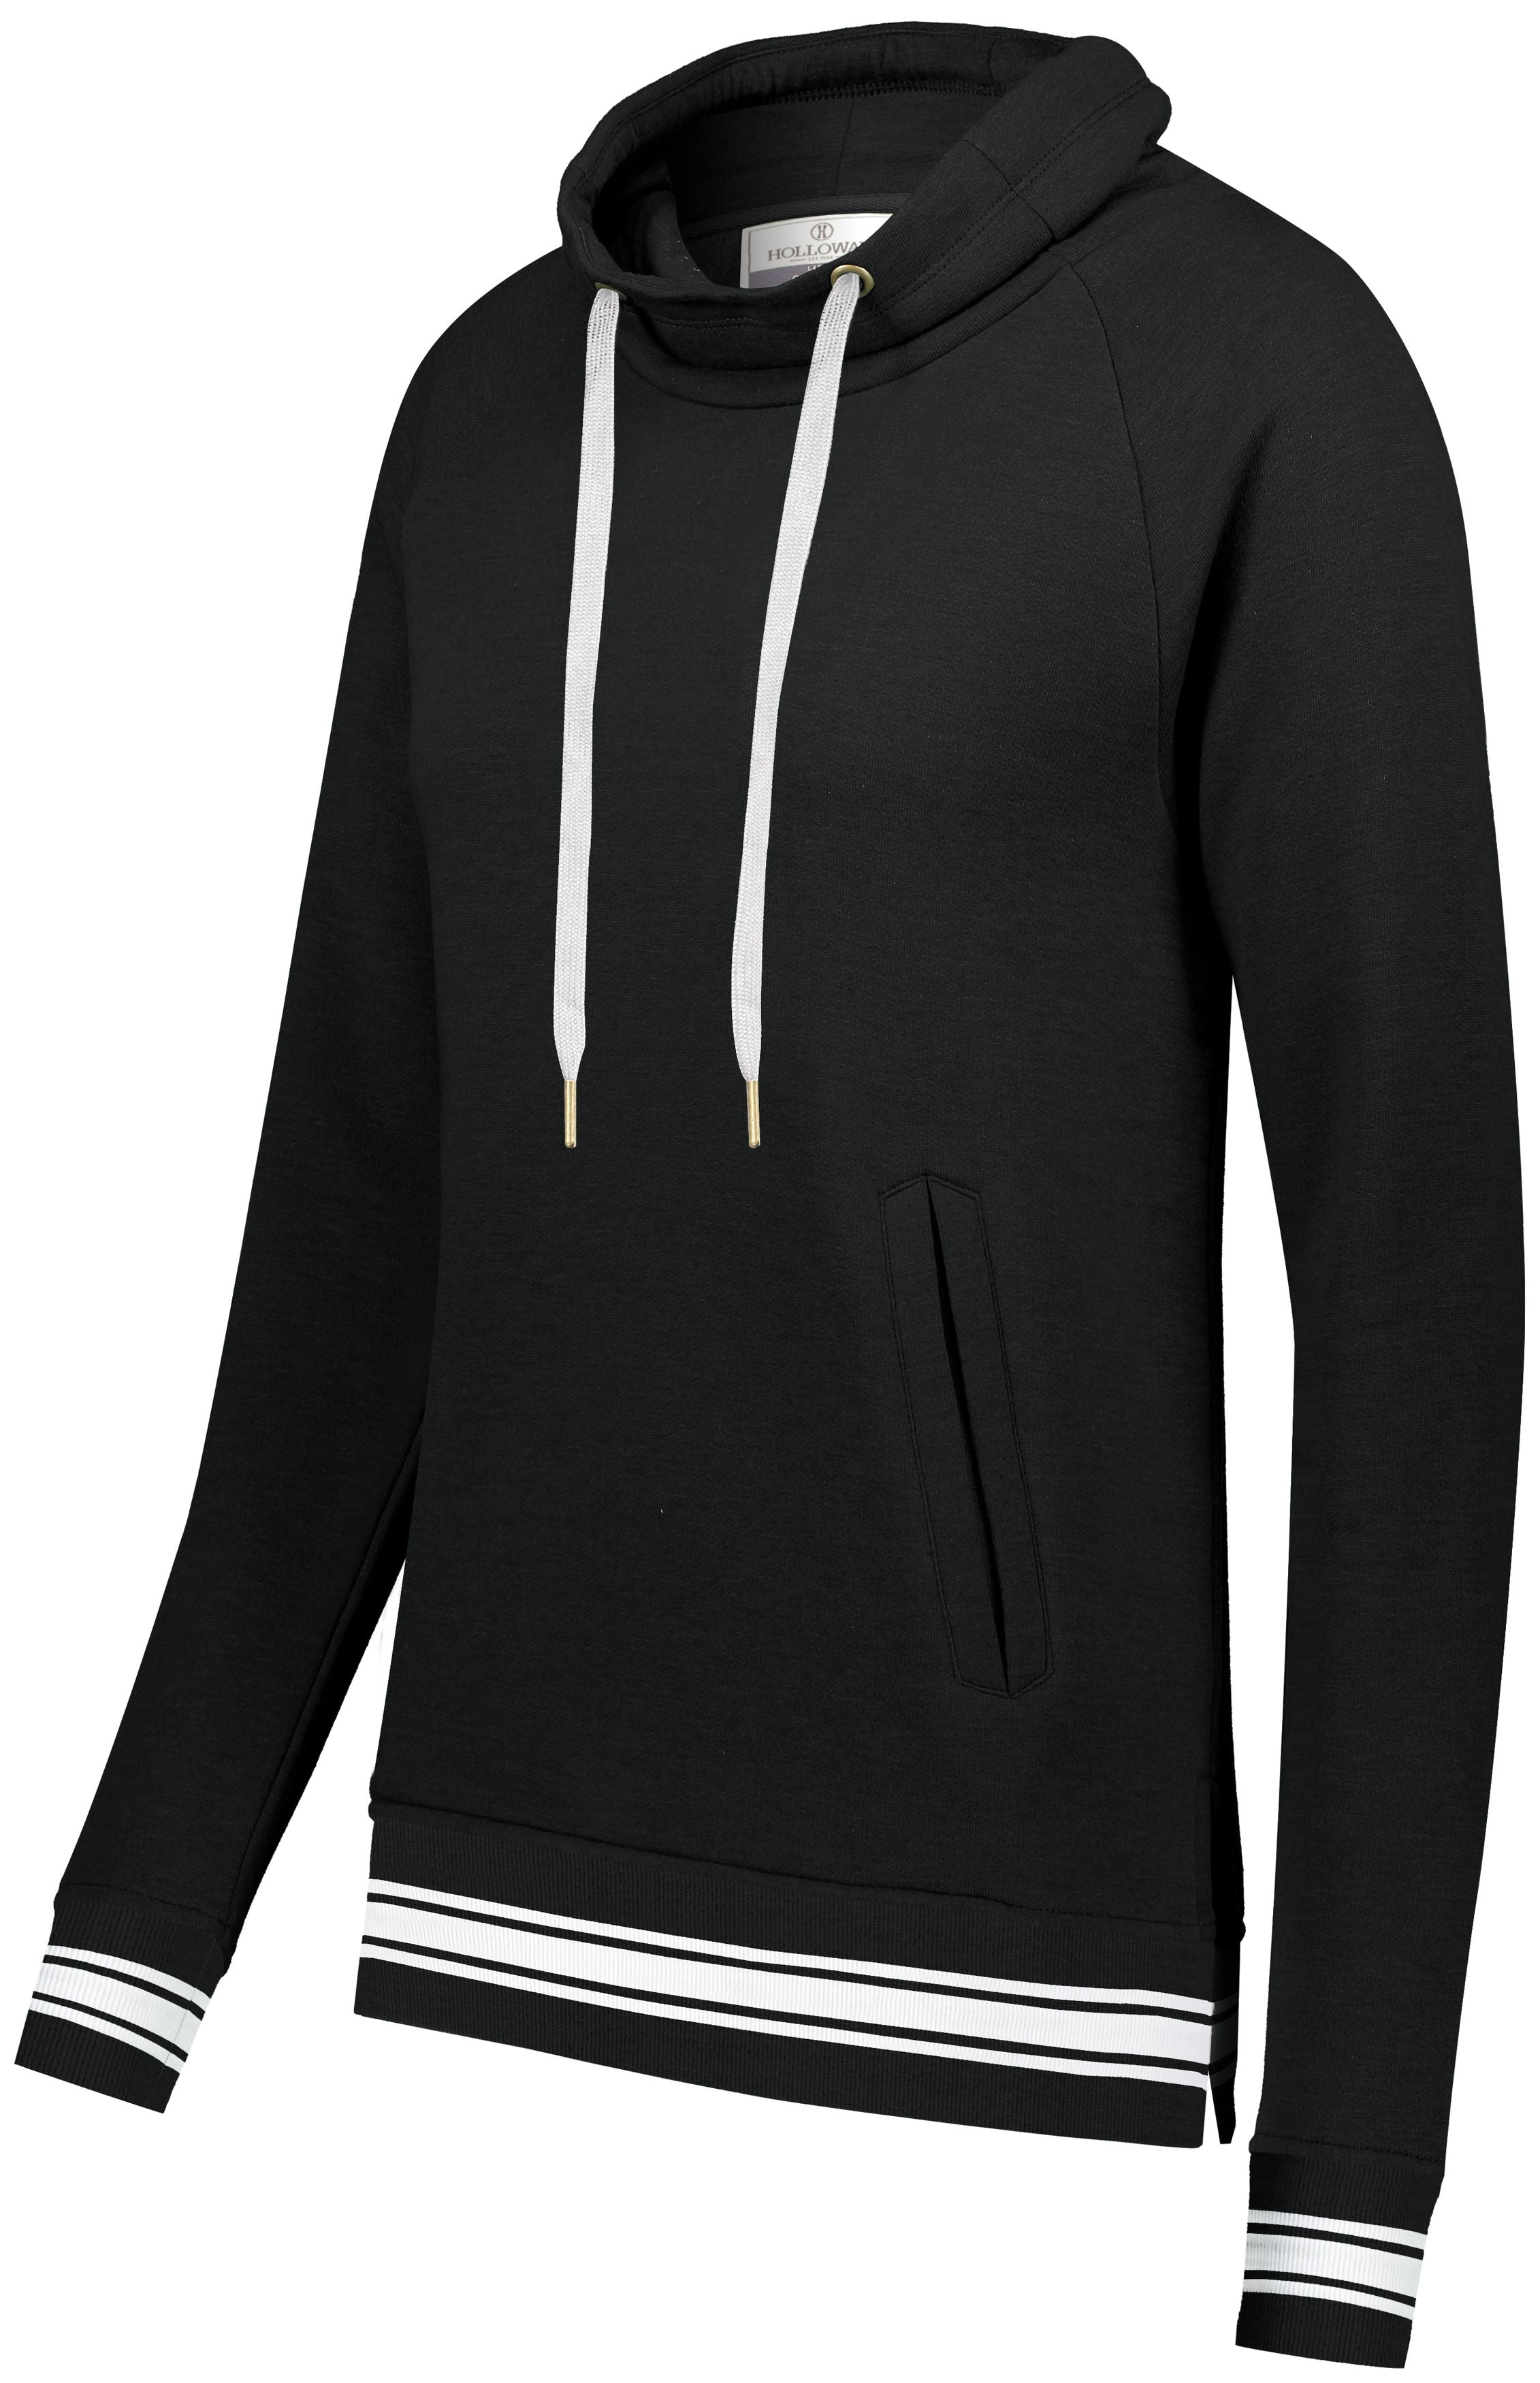 Holloway Ladies Ivy League Funnel Neck Pullover